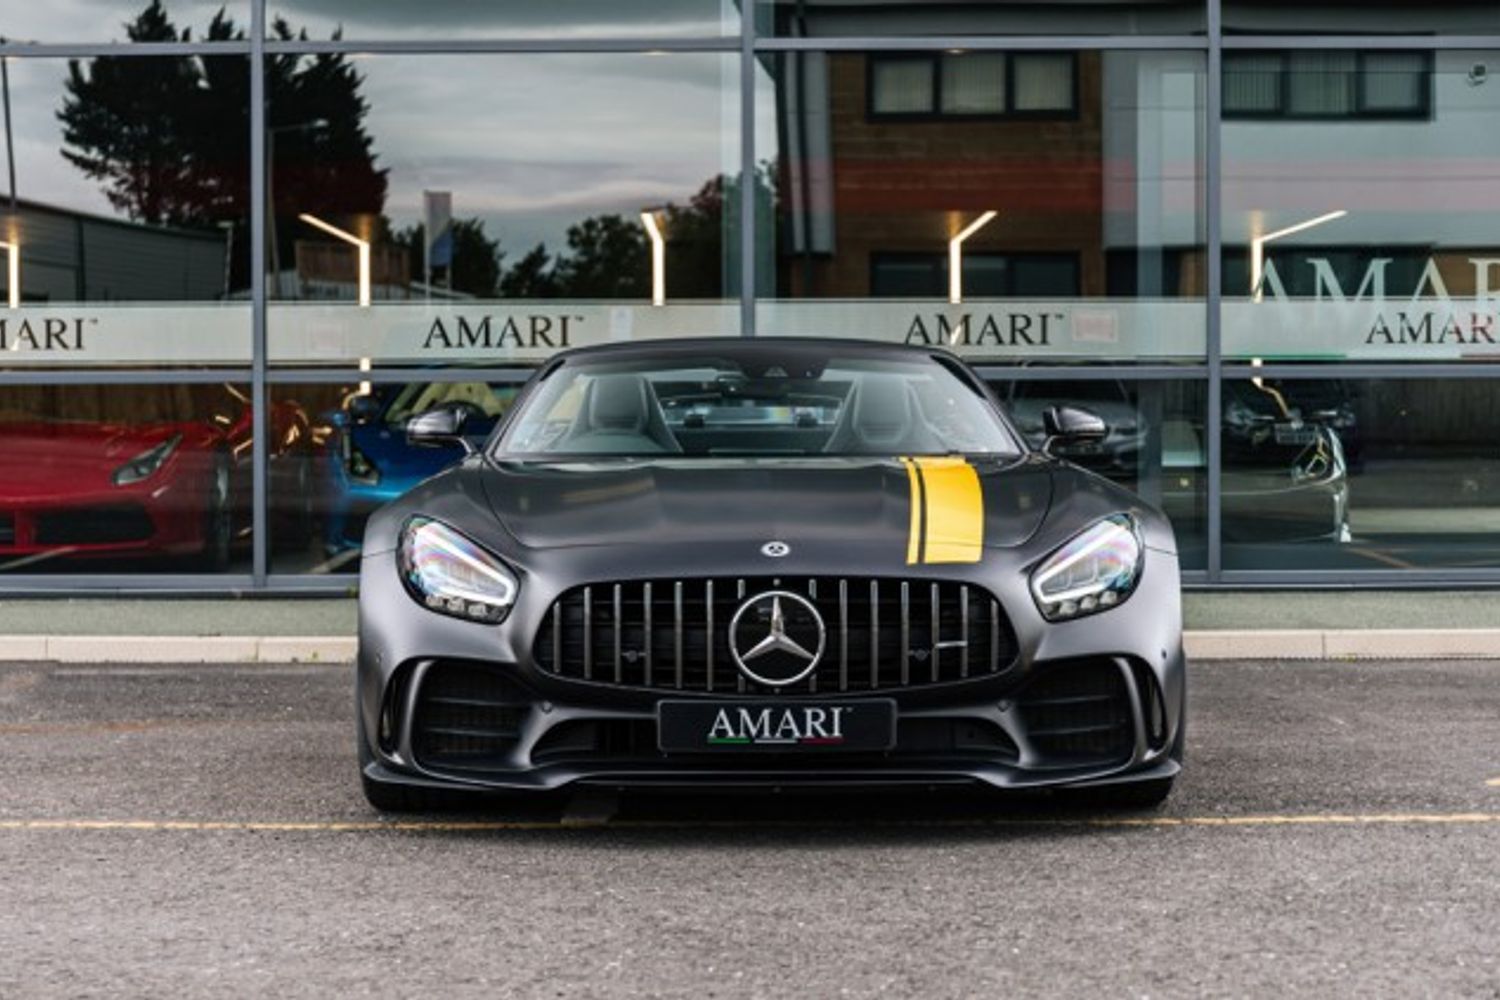 MERCEDES-BENZ GT AMG GT R CONVERTIBLE 4.0 AMG GT R 3DR AUTOMATIC